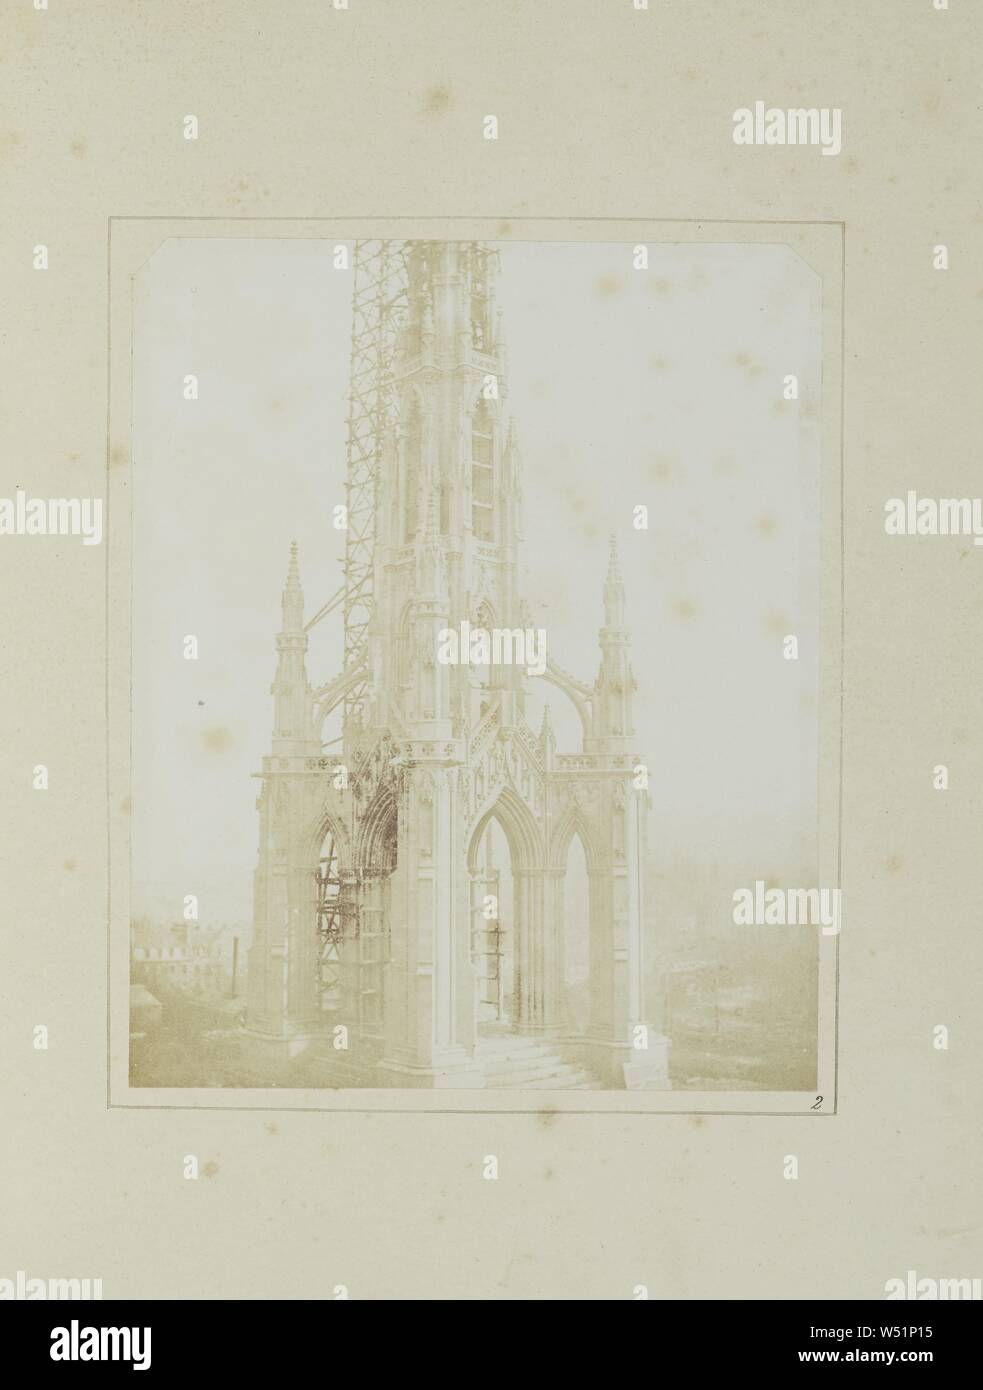 Sir Walter Scott's Monument, Edinburgh, as it appeared when nearly finished, in October 1844., William Henry Fox Talbot (English, 1800 - 1877), Edinburgh, Scotland, October 1844, Salted paper print from a paper negative, 19.4 × 15.6 cm (7 5/8 × 6 1/8 in Stock Photo